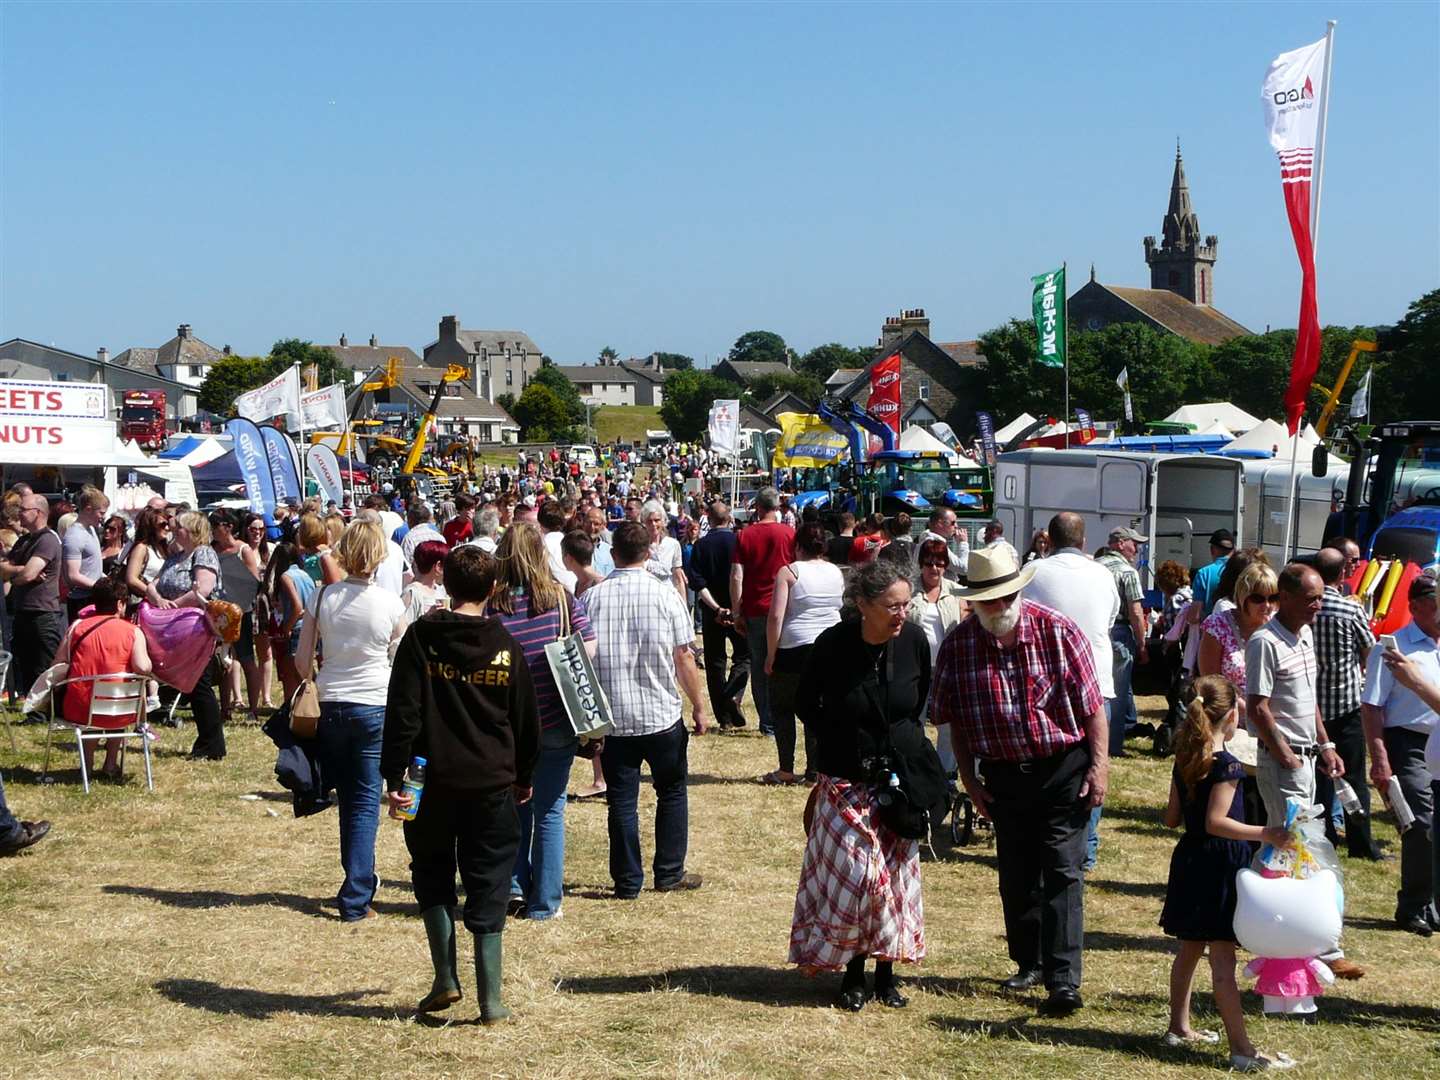 Crowds enjoying glorious sunshine at the County Show in Wick in 2013. Organisers will be hoping for similar weather at Thurso East this weekend as the show returns for the first time since the start of the pandemic.